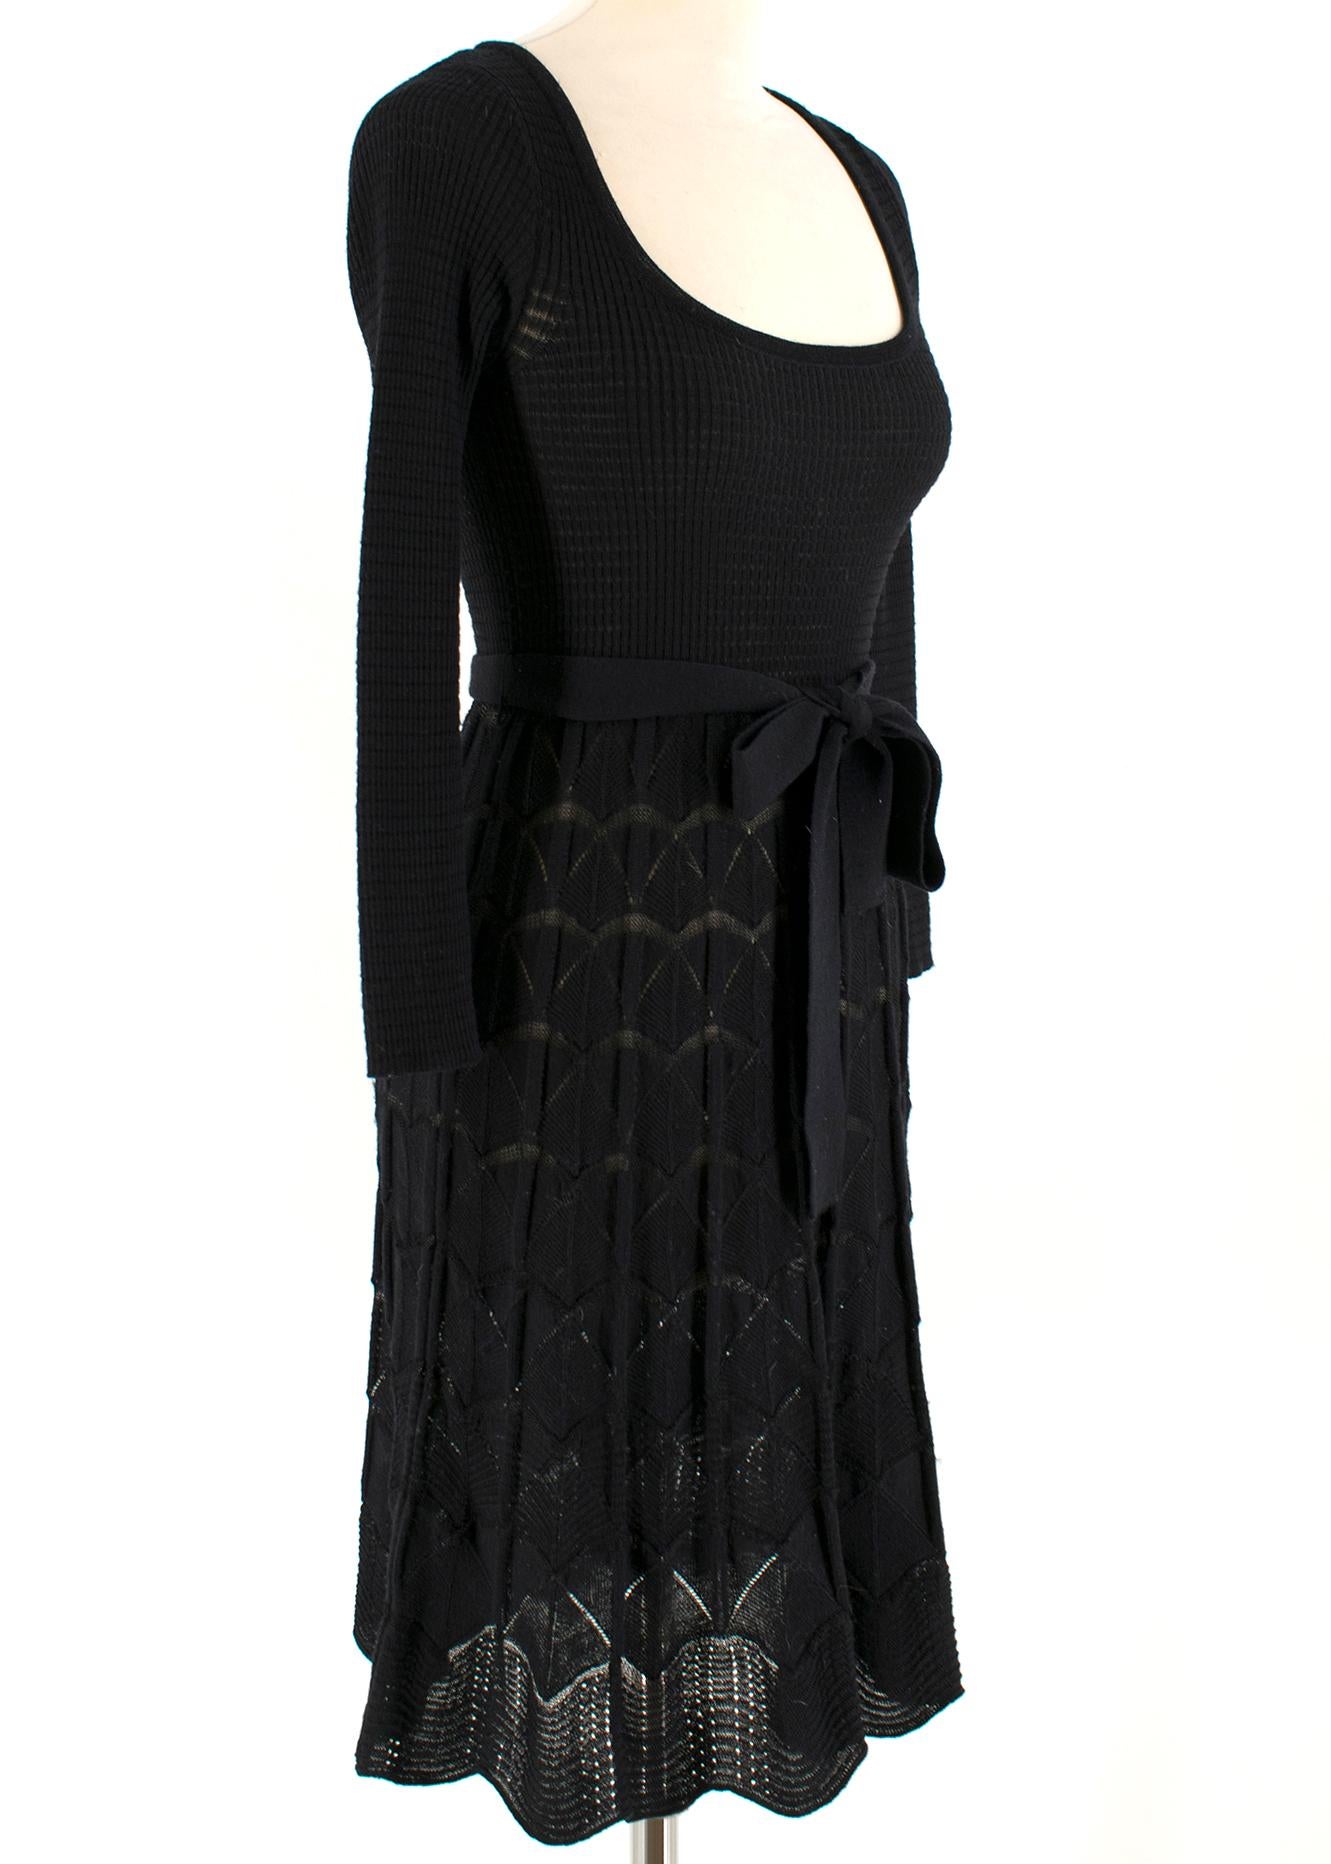 Missoni Black Crotchet Knit-Patterned Stretch Rope Dress

- Black, knit patterned at skirt
- Long-sleeved
- Dipped hem
- Round neck
- Stretched sleeves and bust
- Adustable rope tie at waist

Please note, these items are pre-owned and may show some